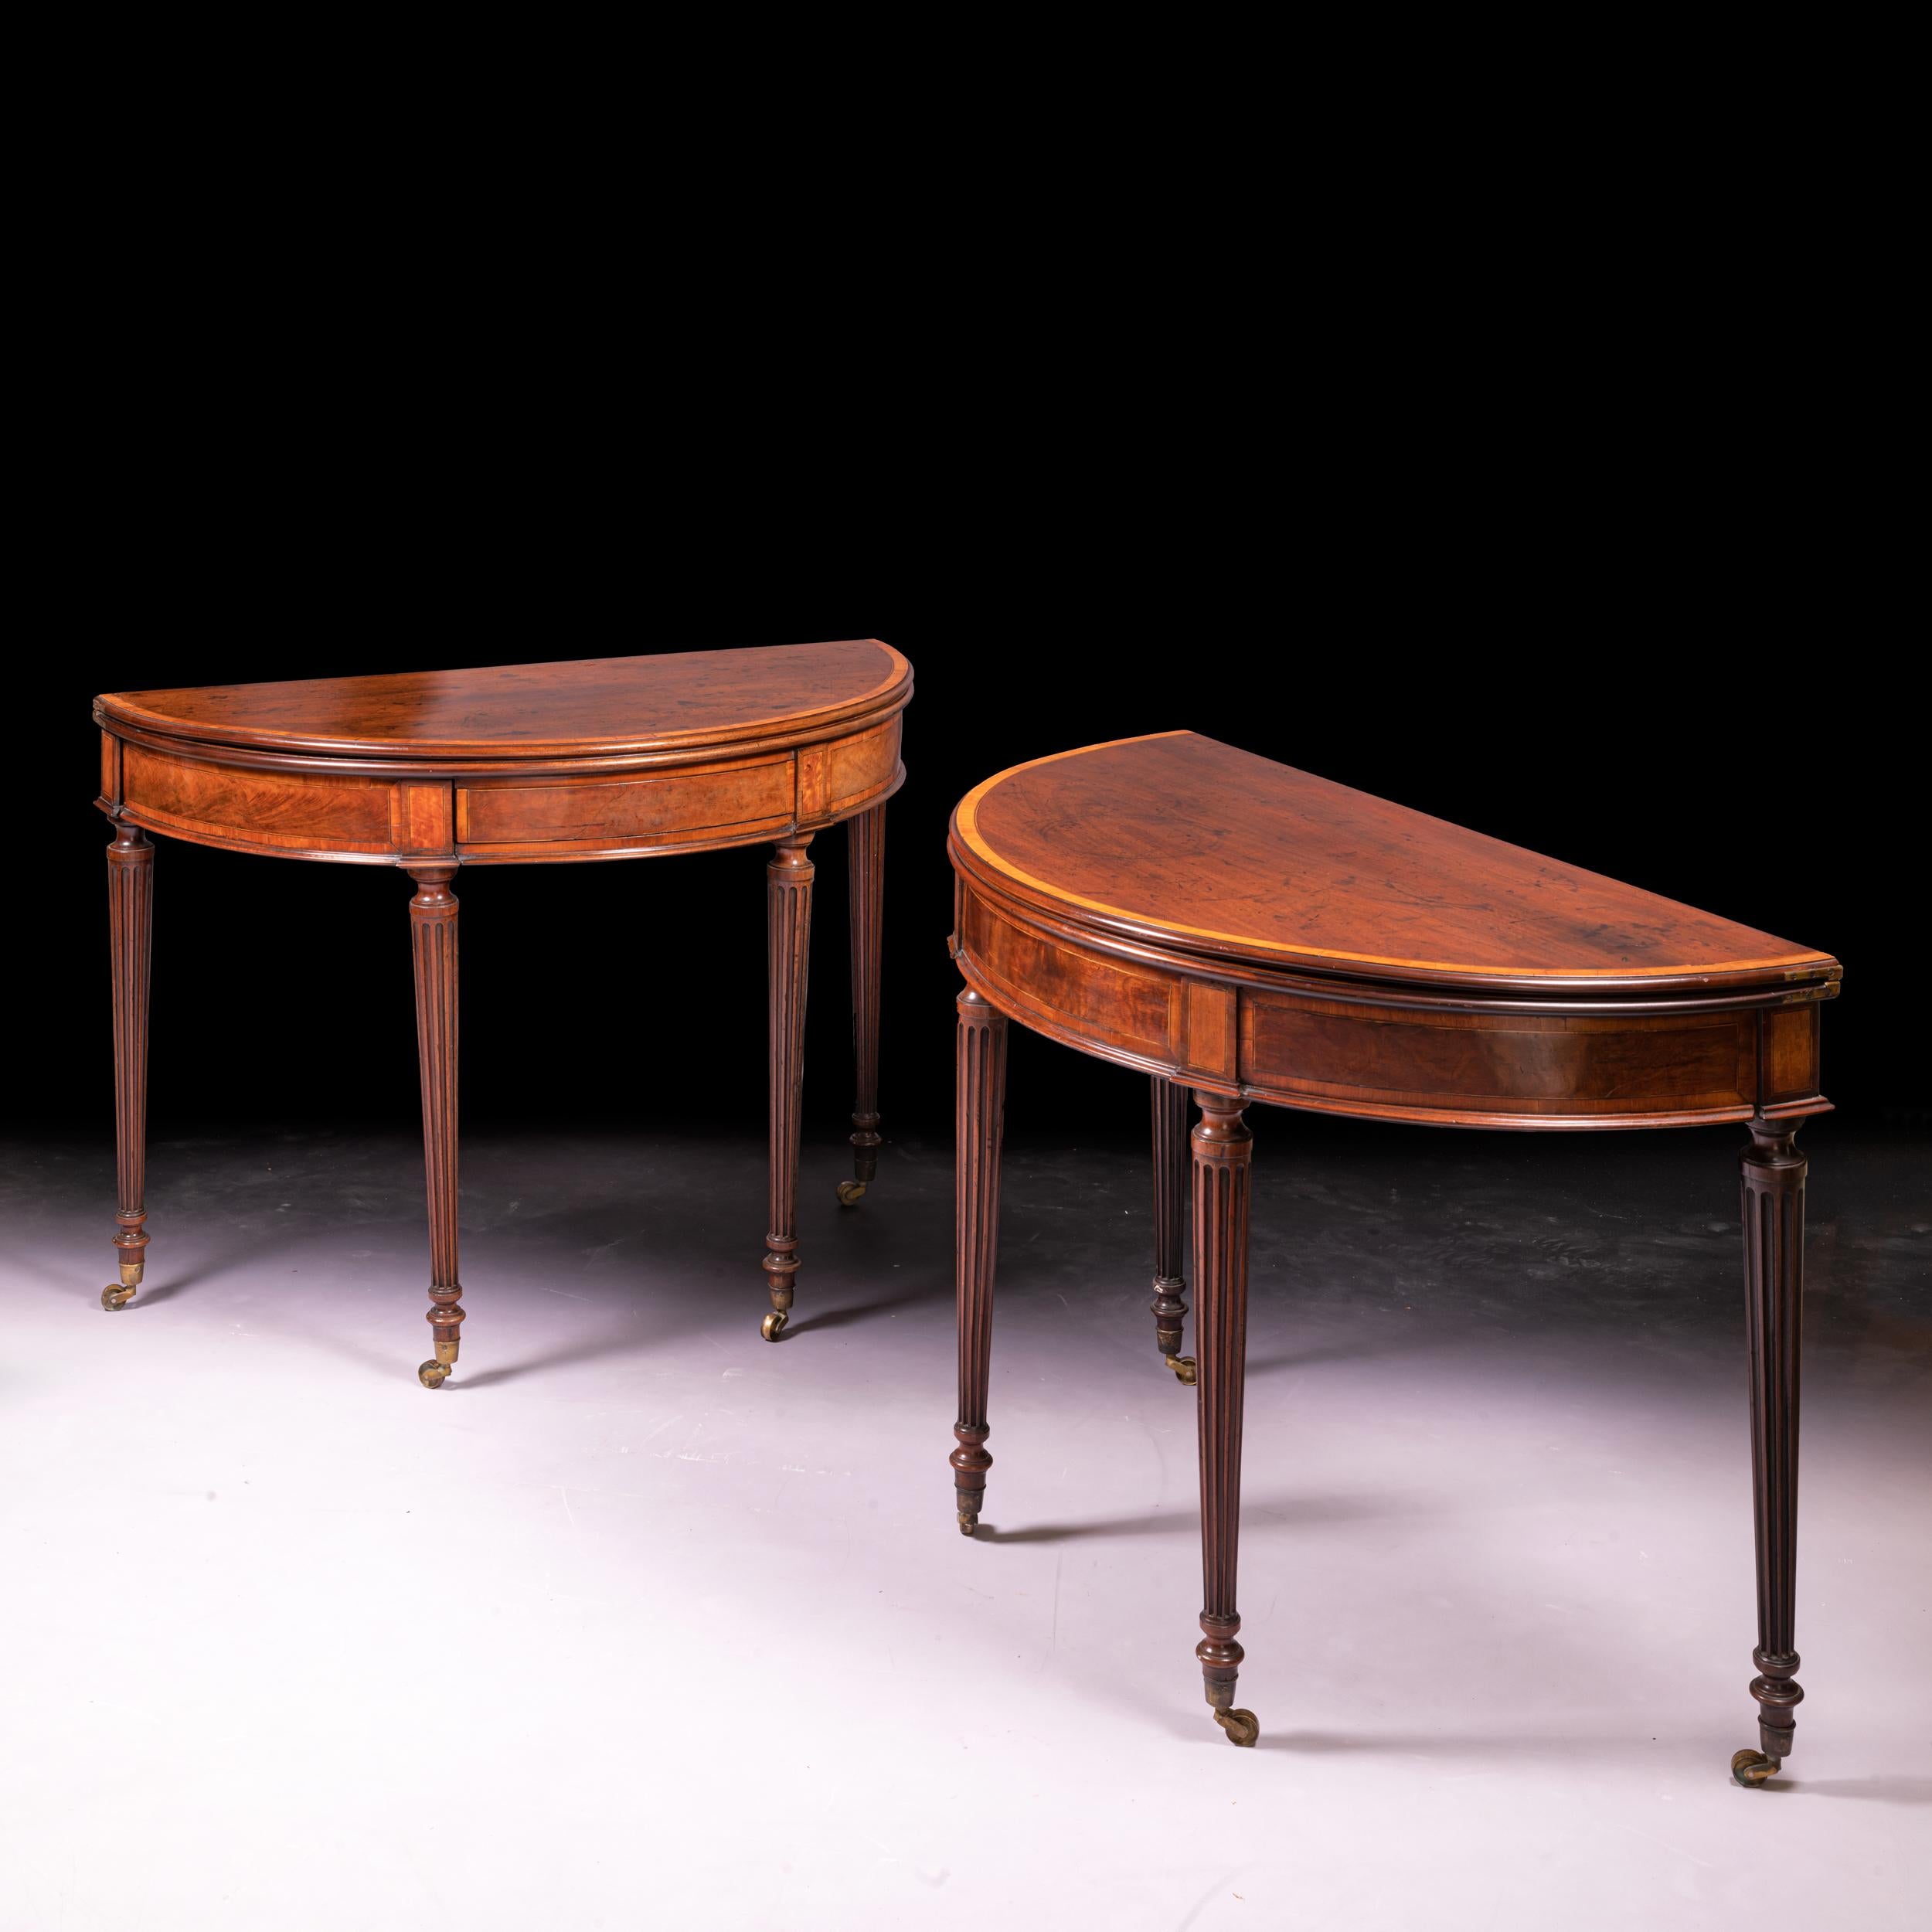 A fine pair of late 18th century Irish George III card tables, constructed in mahogany with crossbanded in satinwood, shaped in demilune outline with moulded frieze and fluted and ring turned tapering legs with brass caps and castors.

Circa